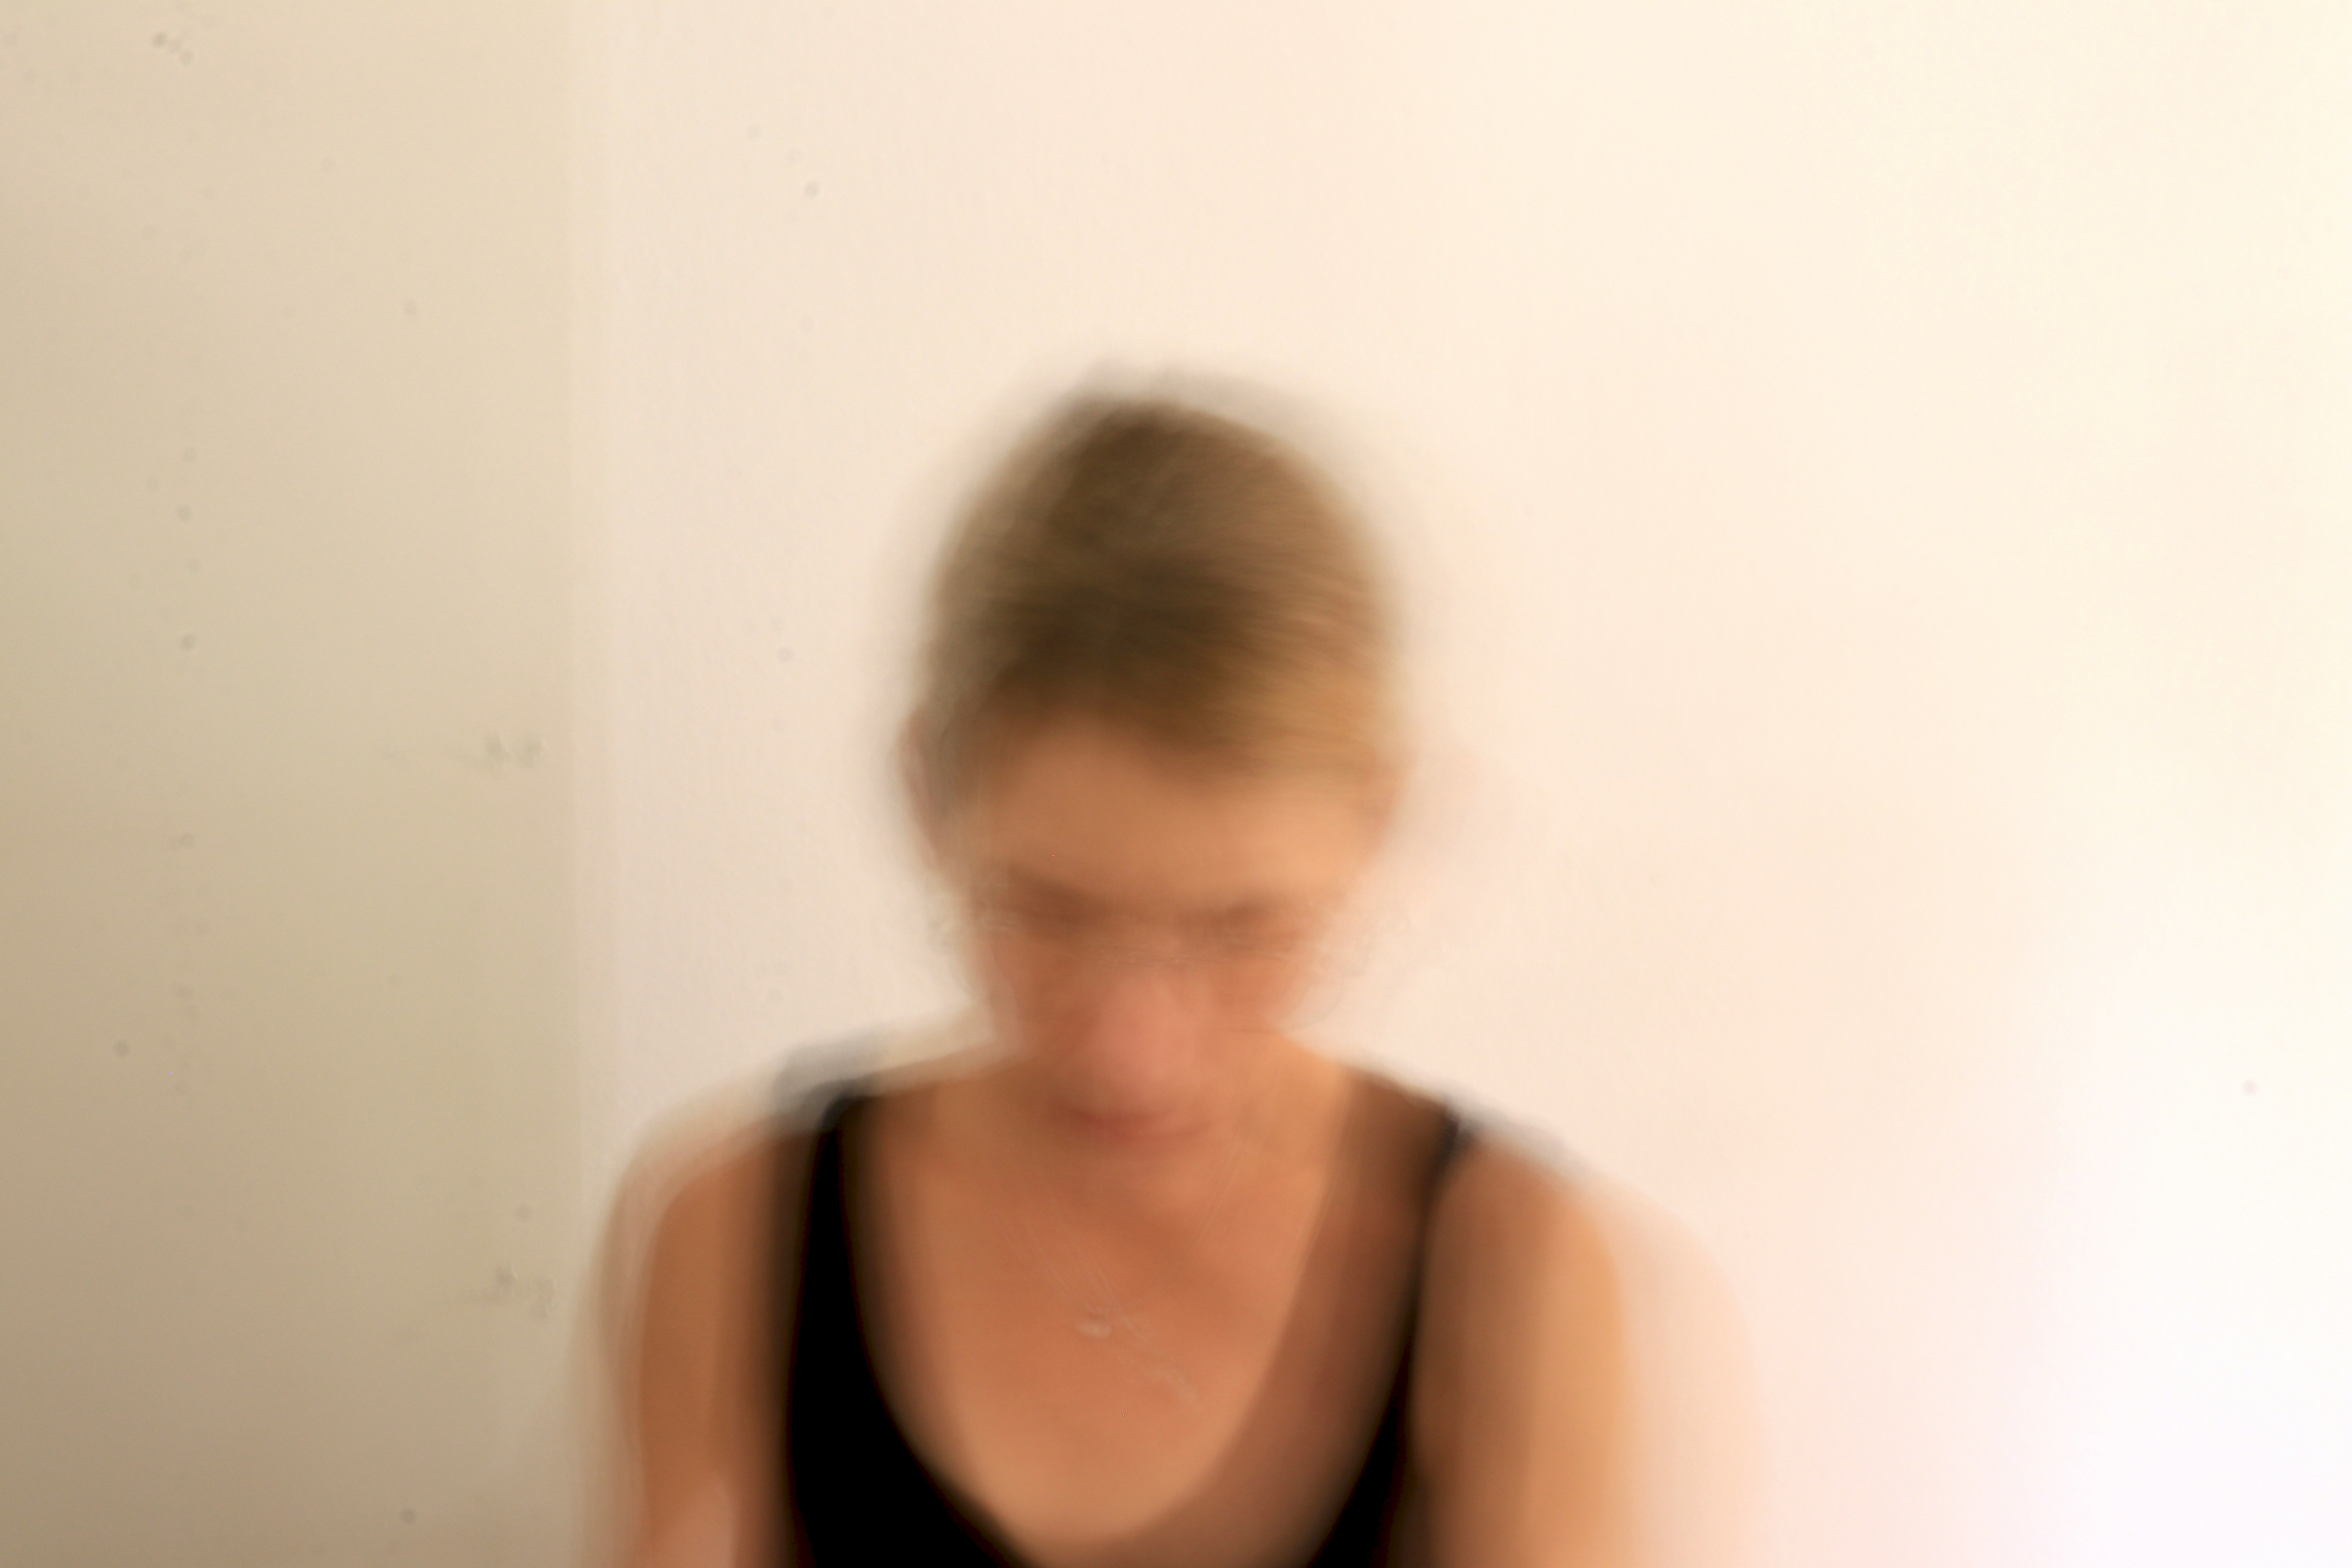 Blurred face of young person, looking downward